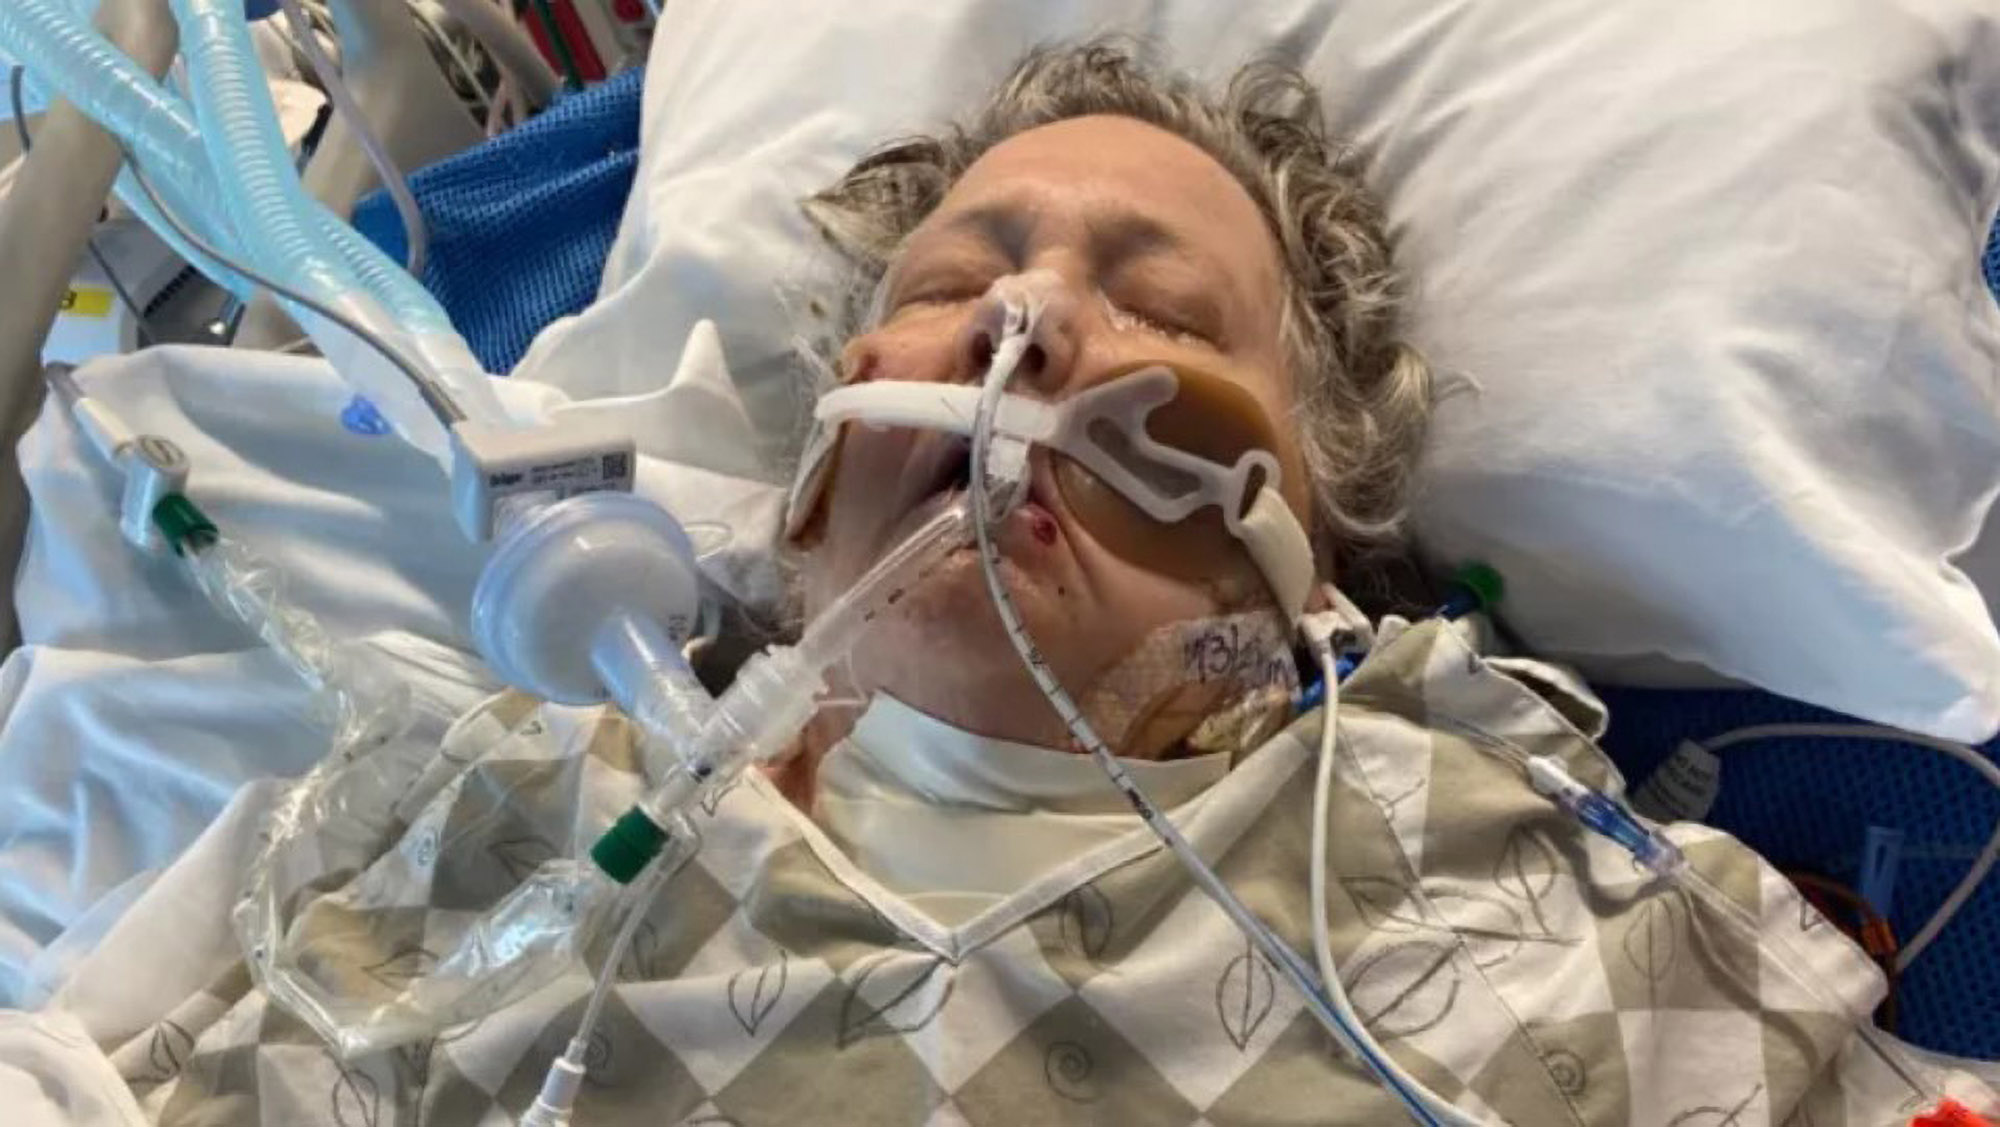 Read more about the article Coma Woman With COVID-19 Wakes Up Just As Her Life Support Machine Was Due To Be Switched Off